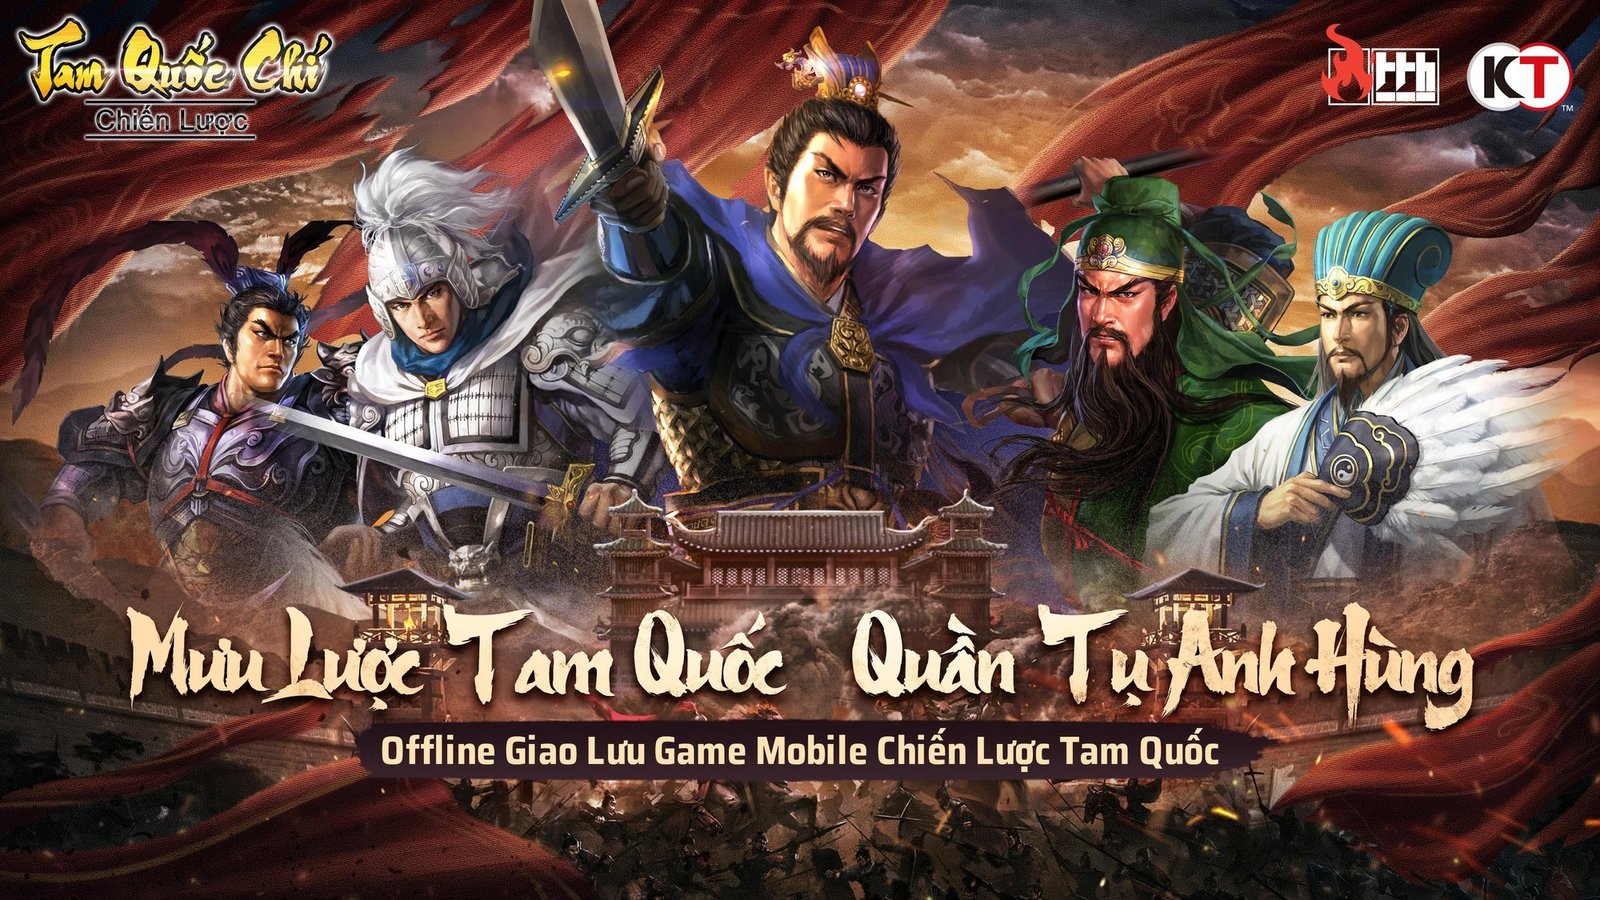 Romance of the Three Kingdoms – Strategy solemnly held offline, set for Close Beta November 3, 2022